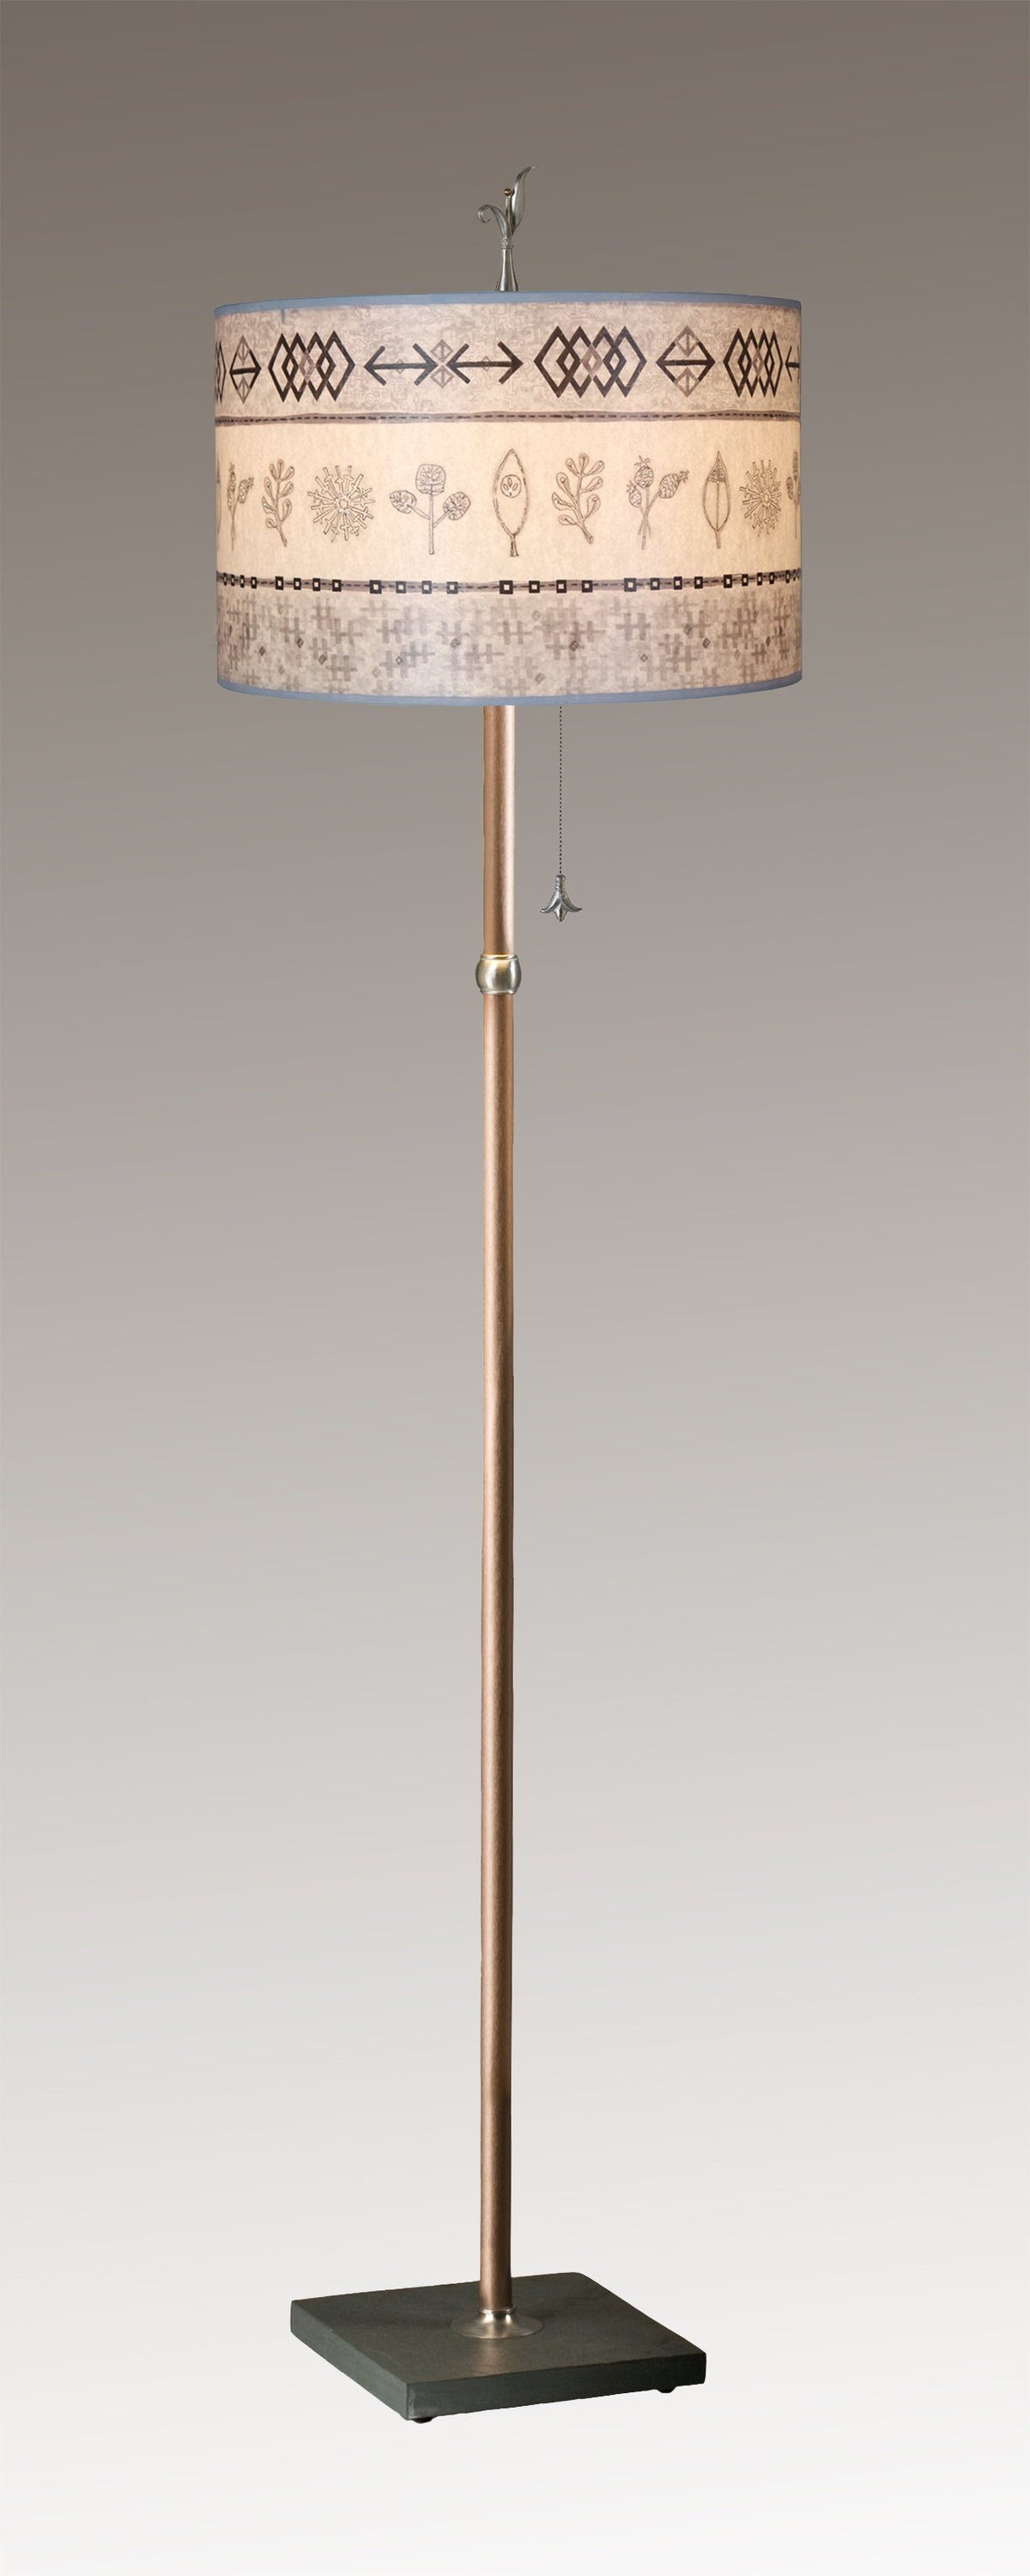 Copper Floor Lamp with Large Drum Shade in Woven &amp; Sprig in Mist